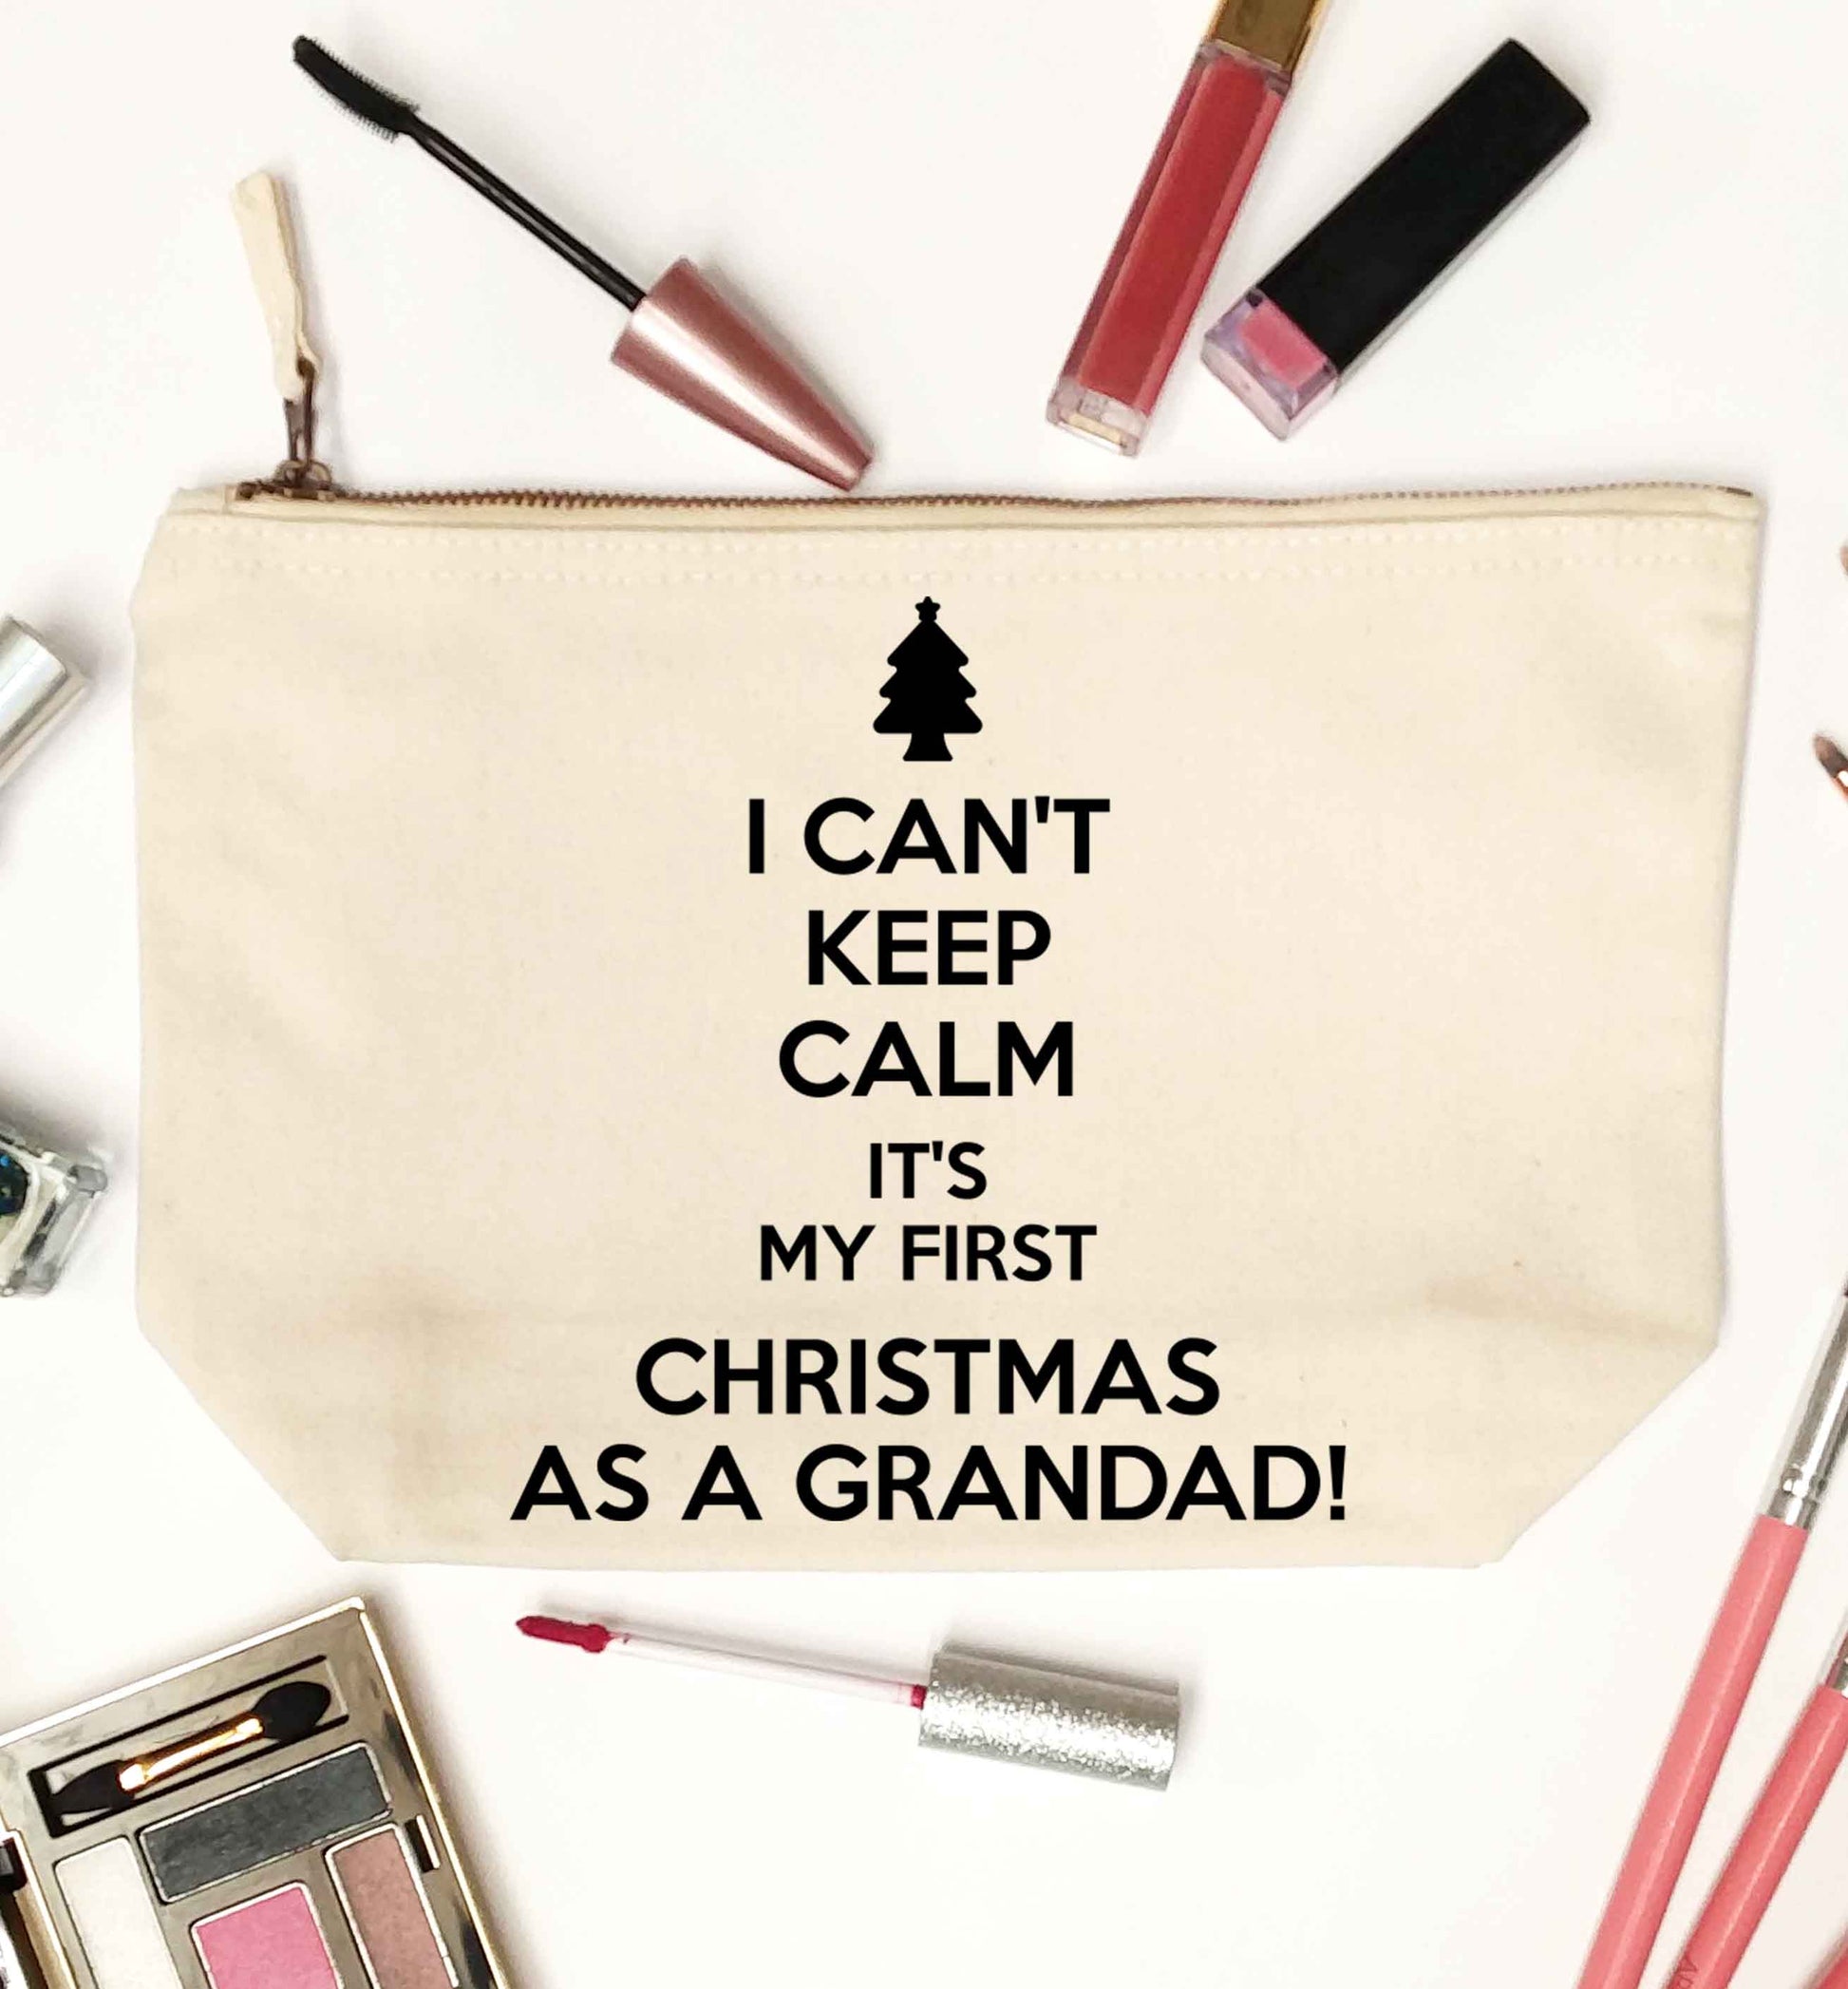 I can't keep calm it's my first Christmas as a grandad! natural makeup bag